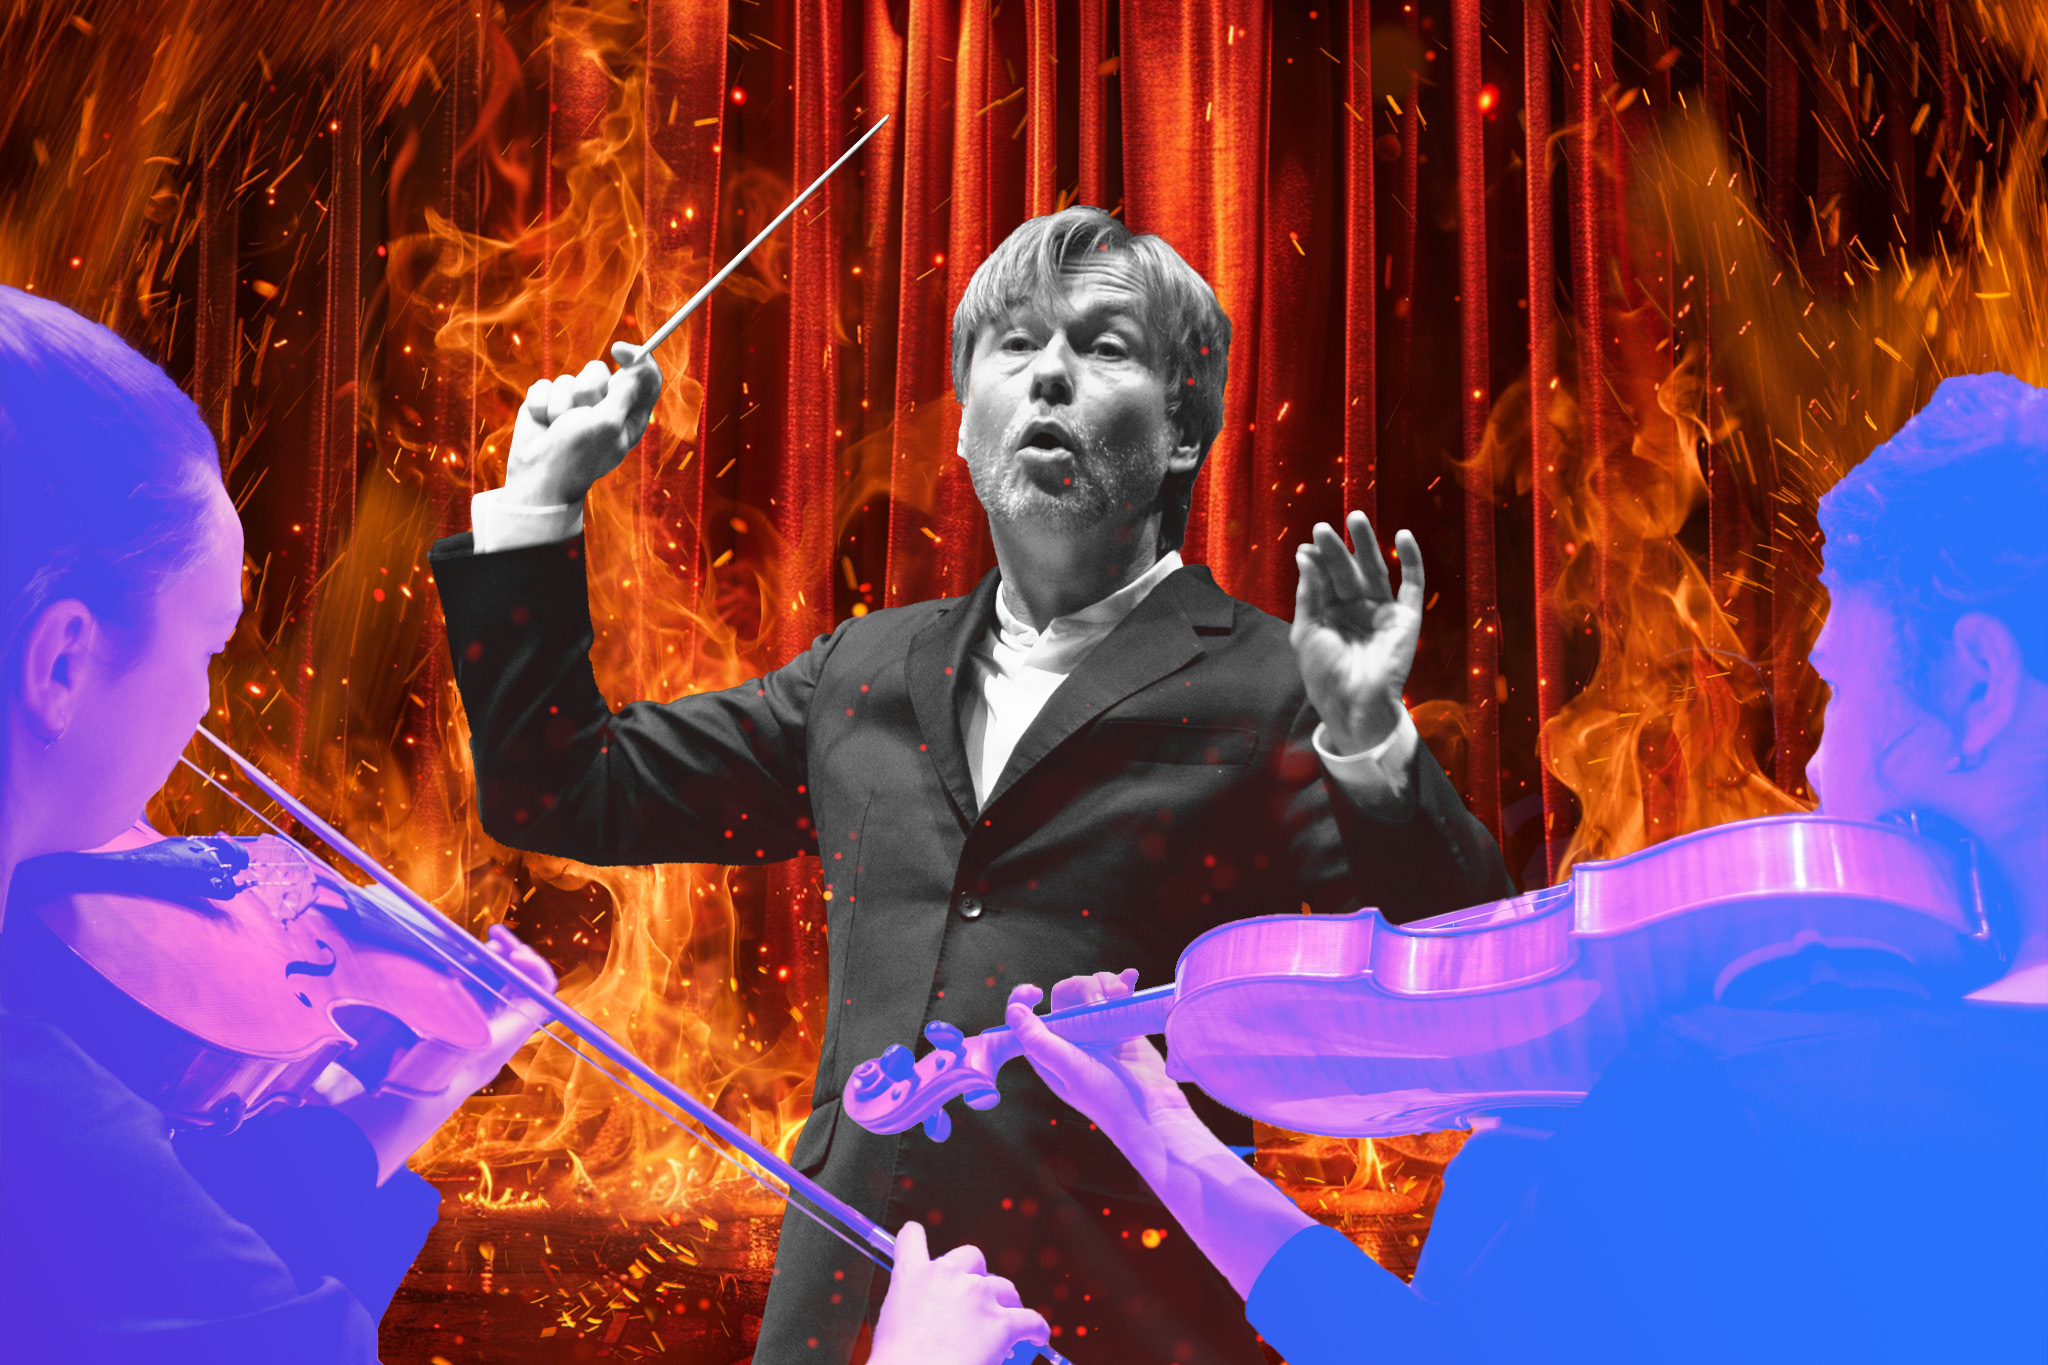 The image shows a conductor passionately leading musicians, with flames and a fiery red backdrop intensifying the scene. Two violinists are visible in the foreground.